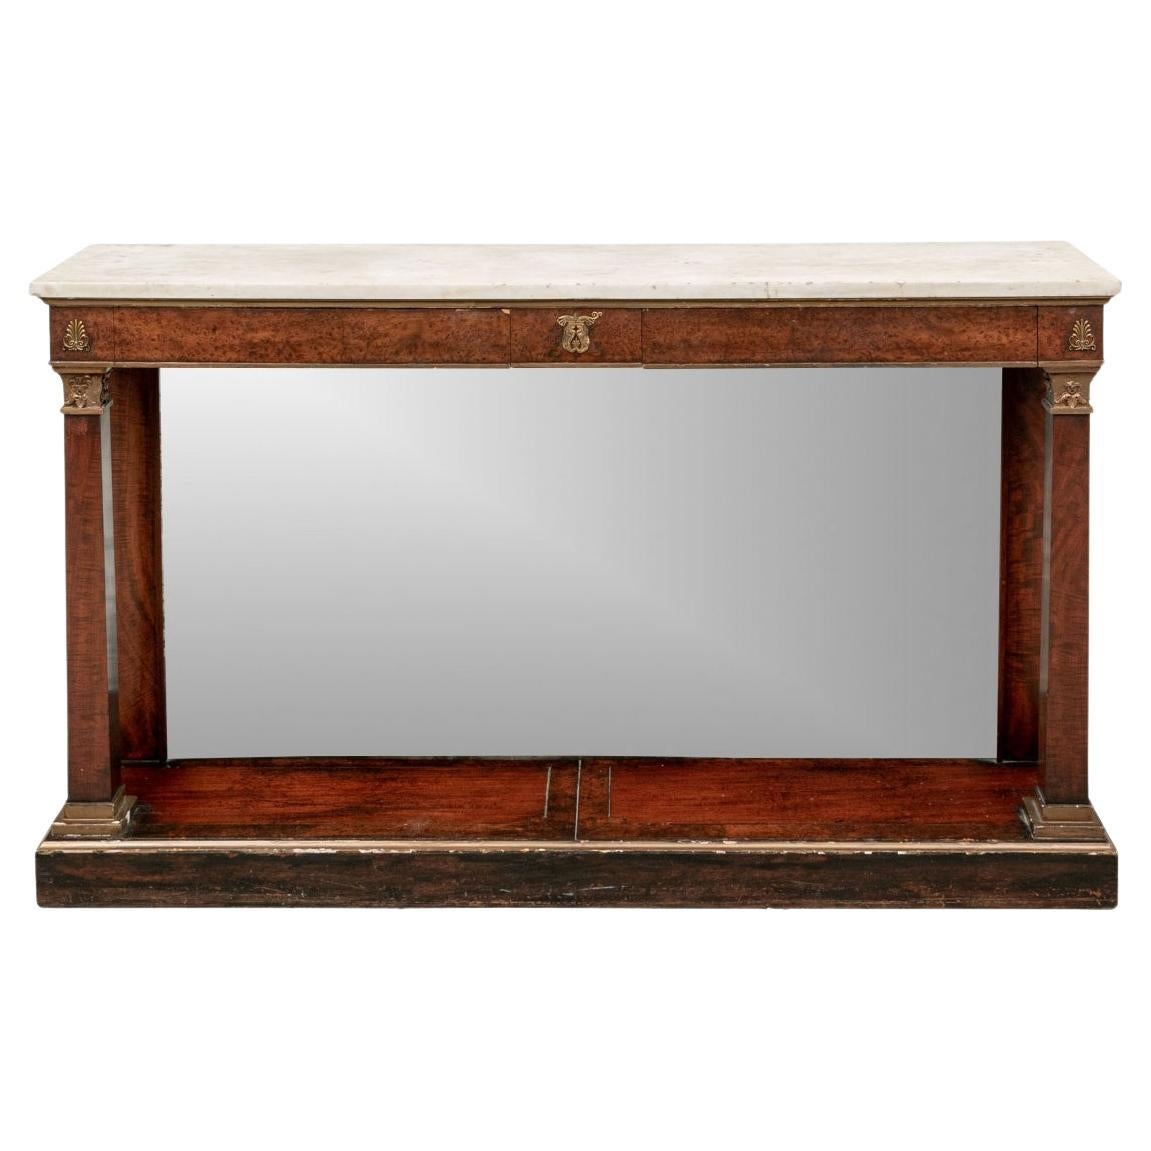 19th C. British  Neoclassical Console Table For Sale